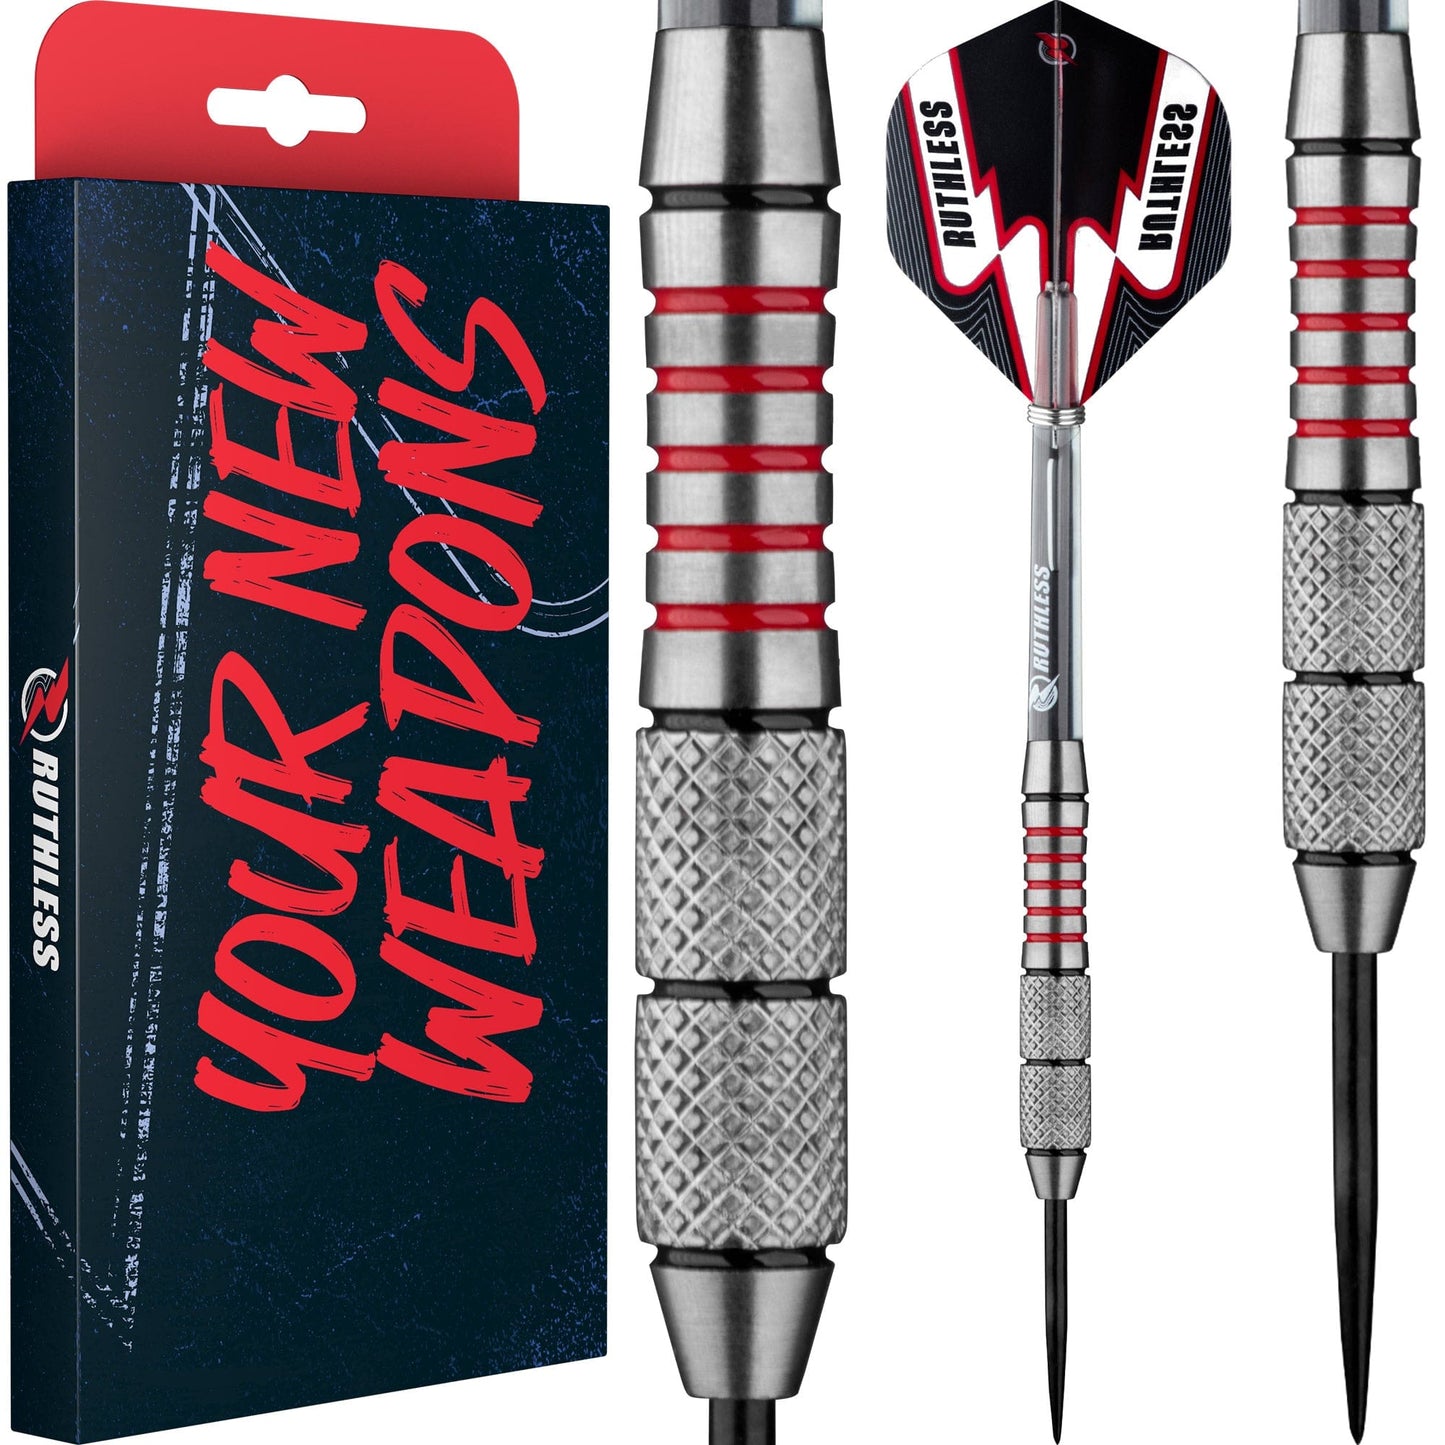 Ruthless Scallop Darts - Steel Tip - Front Knurl - Black & Red - 23g 23g